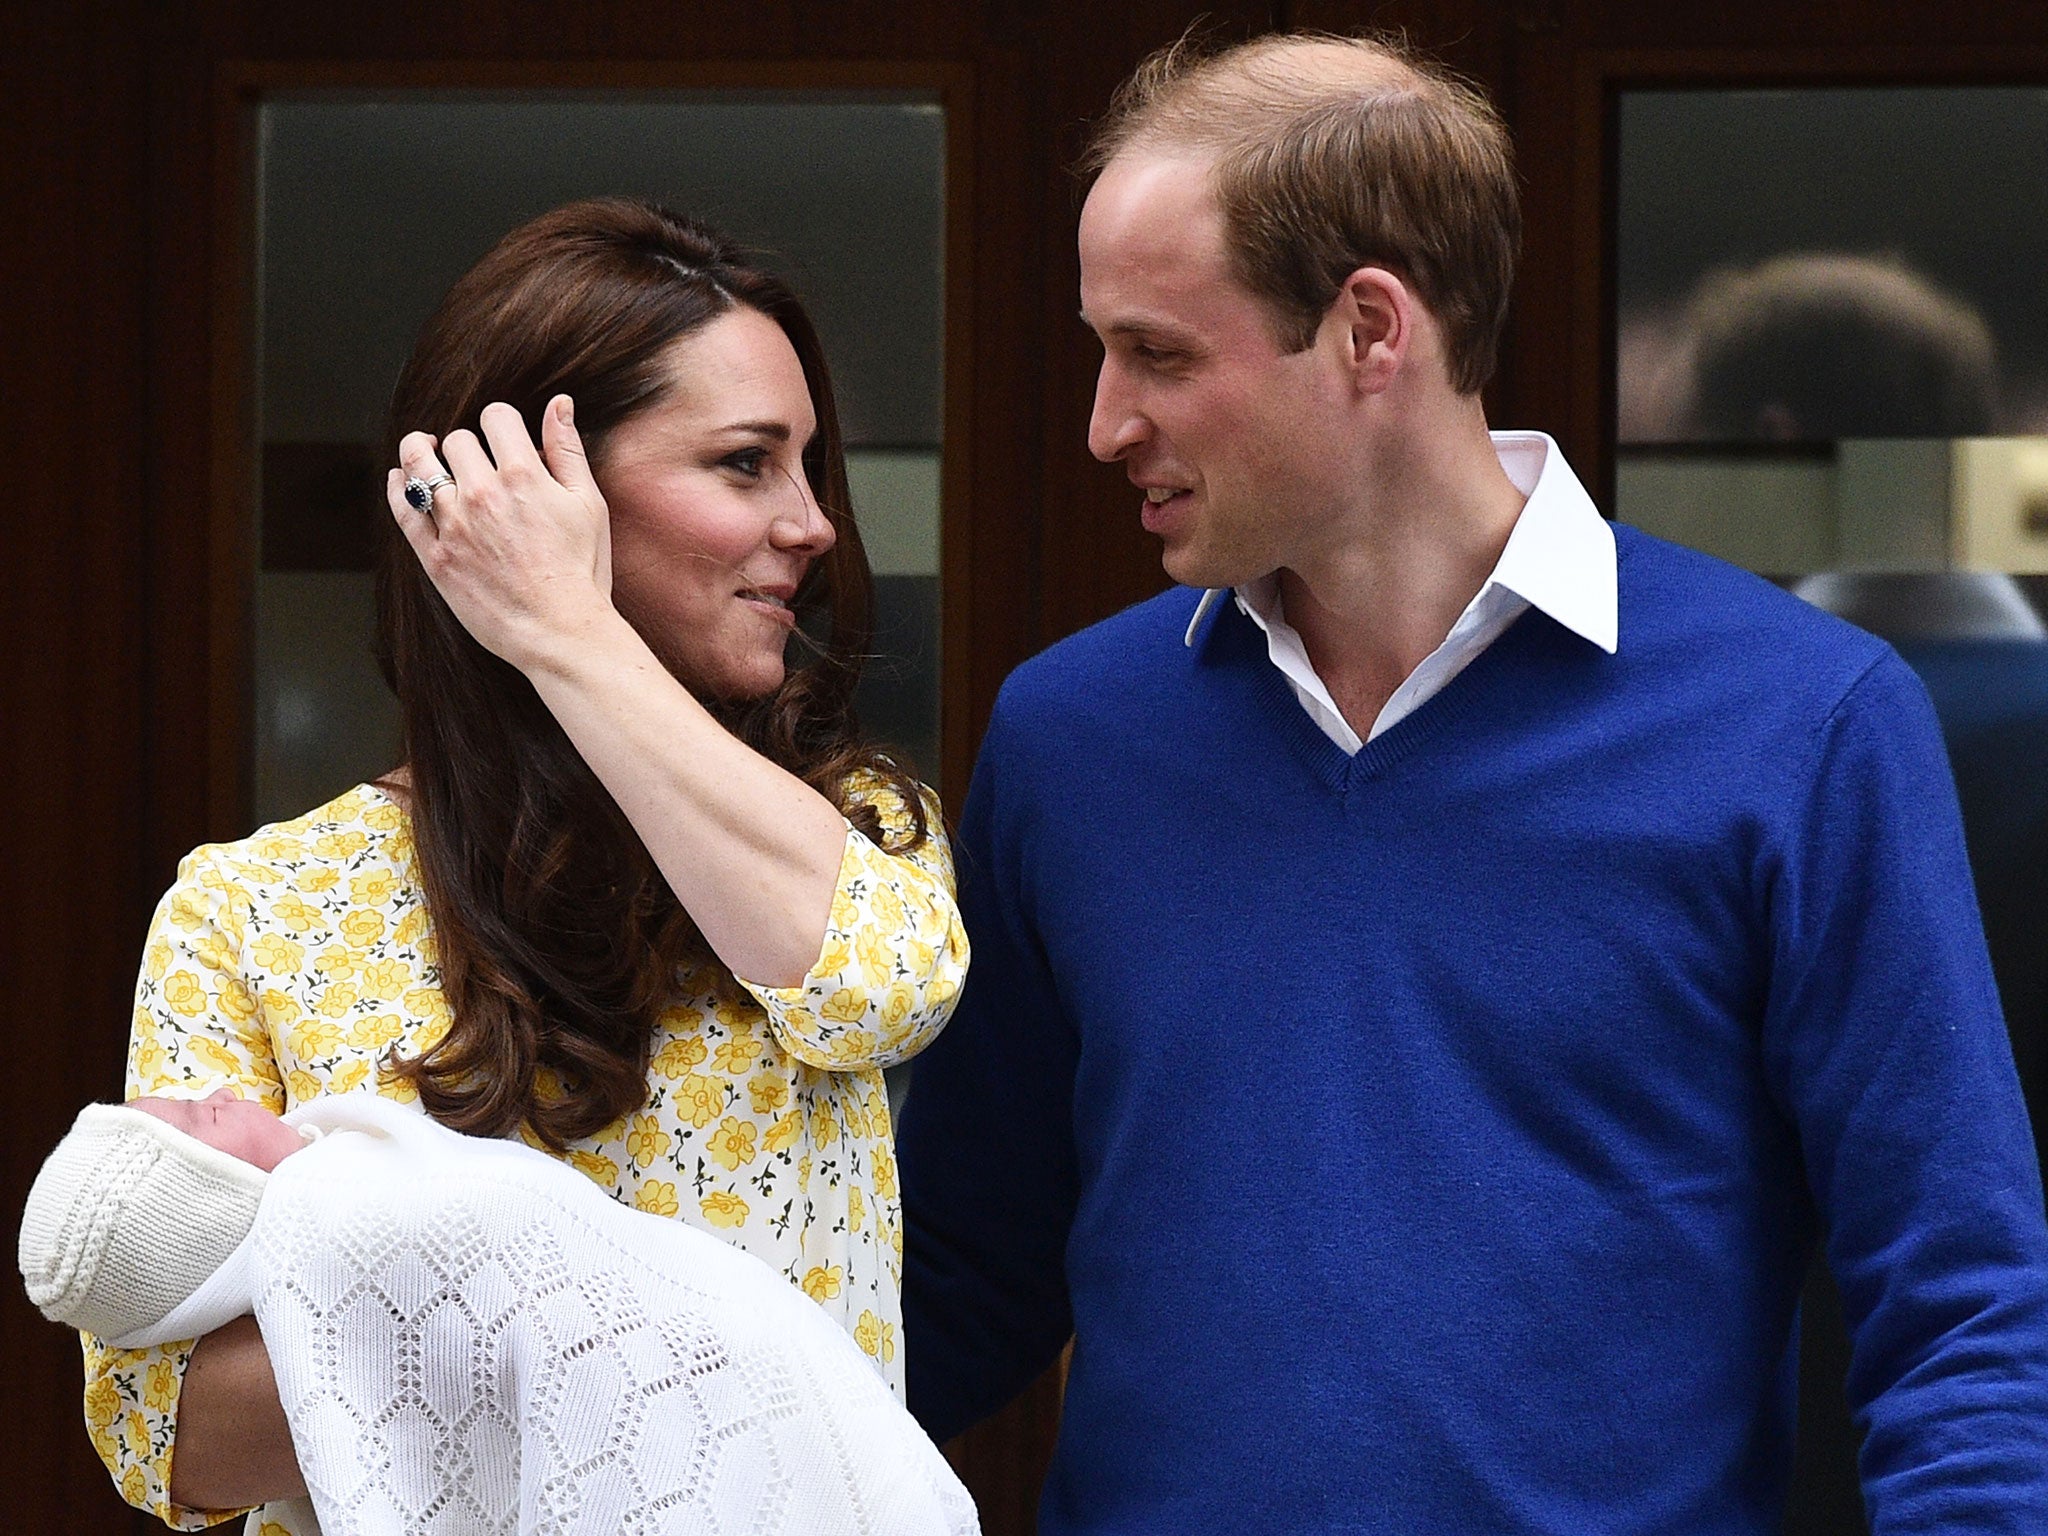 Prince William, Duke of Cambridge looks towards his wife Catherine, Duchess of Cambridge, as they show their newly-born daughter, their second child, to the media outside the Lindo Wing at St Mary's Hospital in central London. The Duchess of Cambridge wa